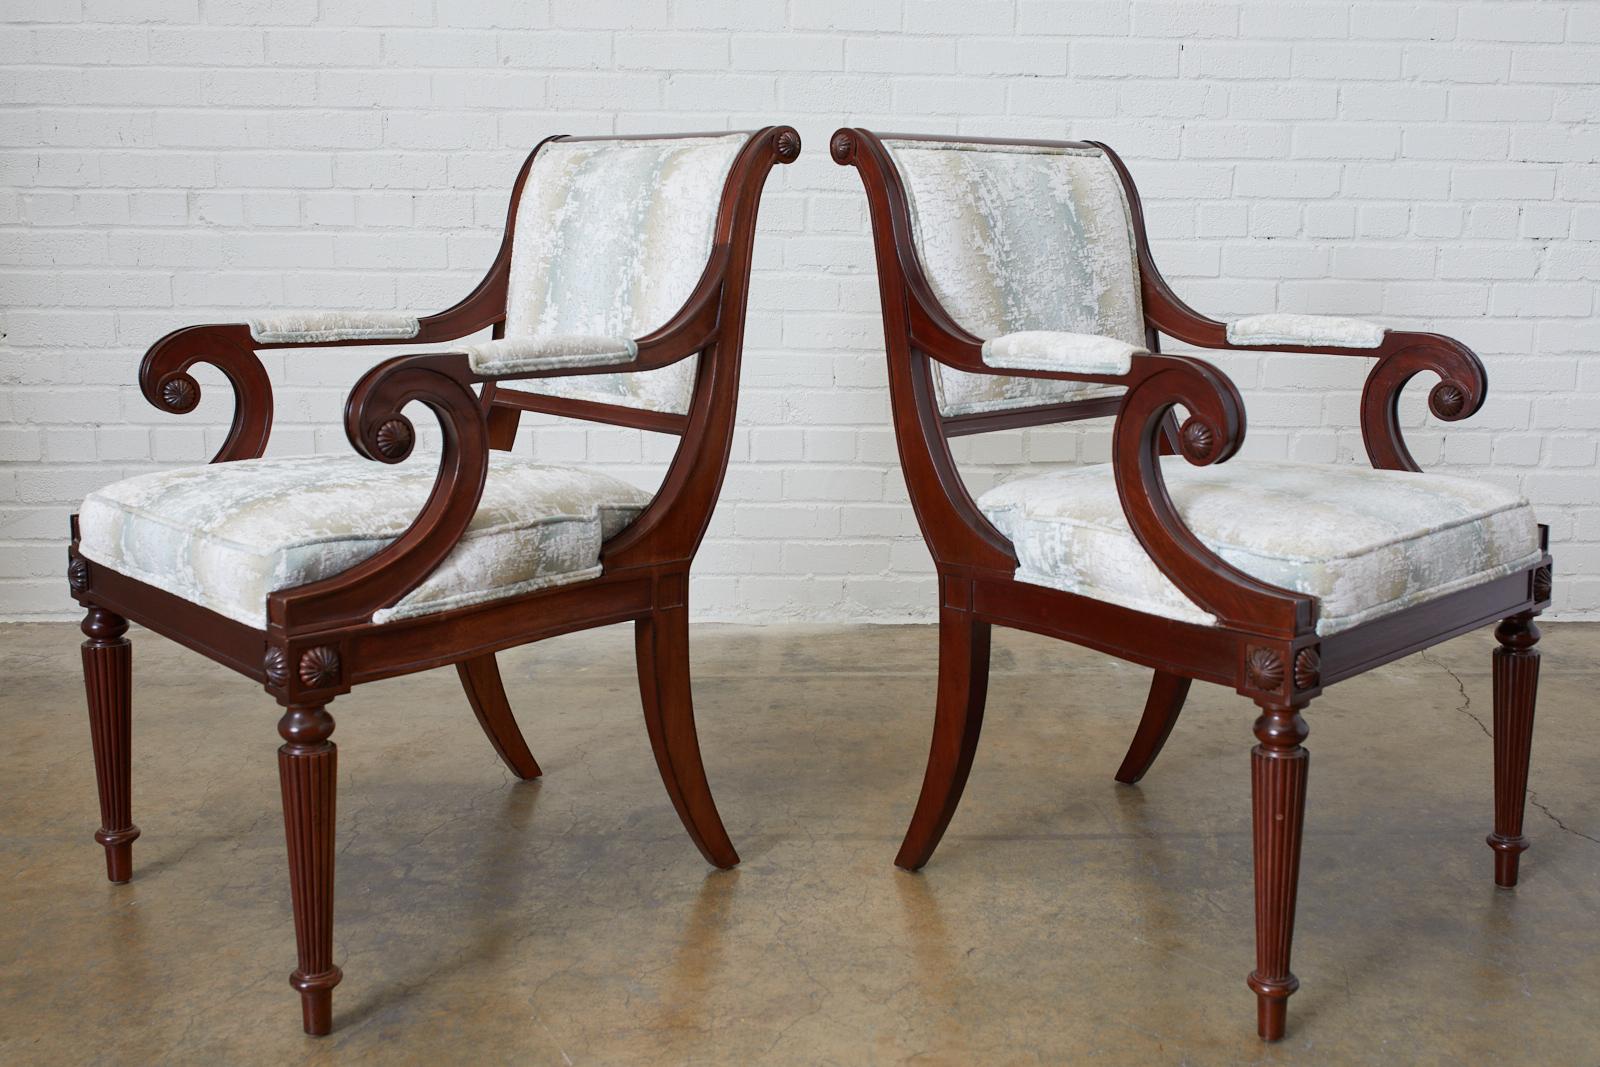 Distinctive set of eight mahogany dining chairs made in the English Regency taste. Iconic profiles featuring a scrolled back that gracefully curves down to klismos rear legs. The set consists of two armchairs and six side chairs measuring 22 inches